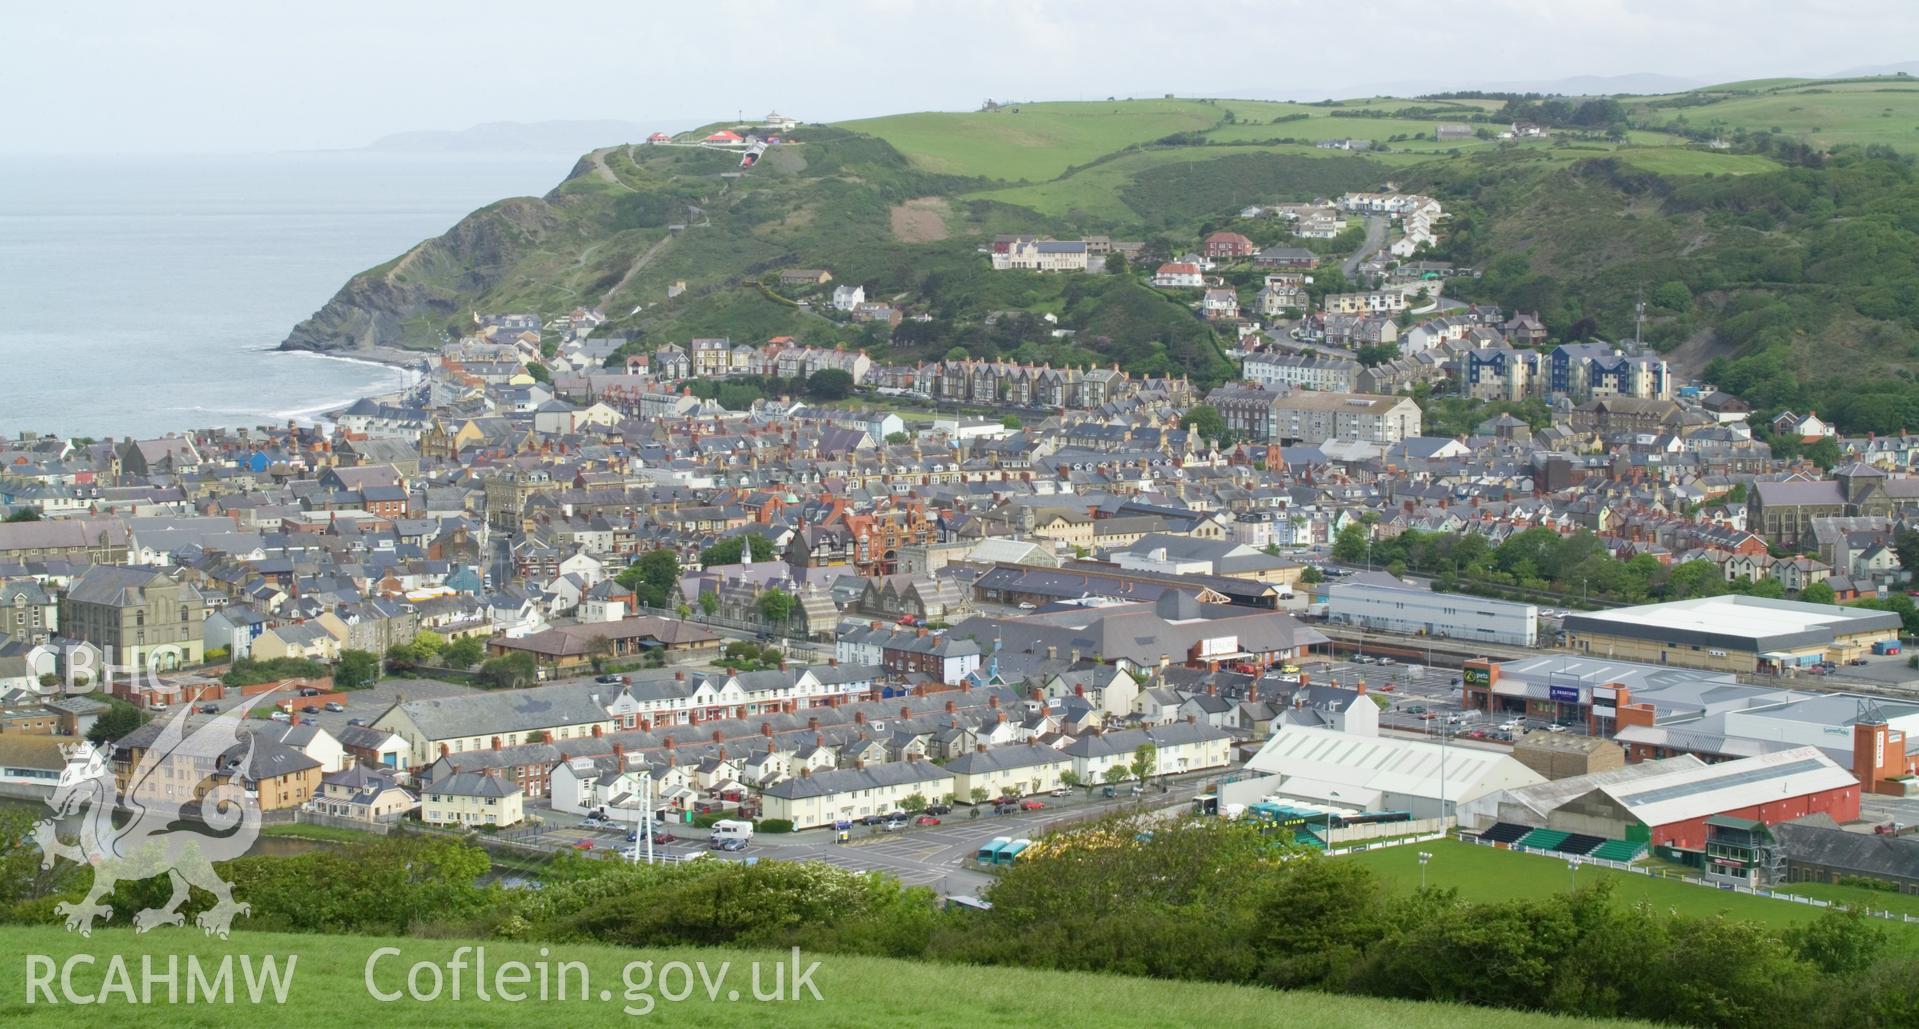 Central Aberystwyth from the south.